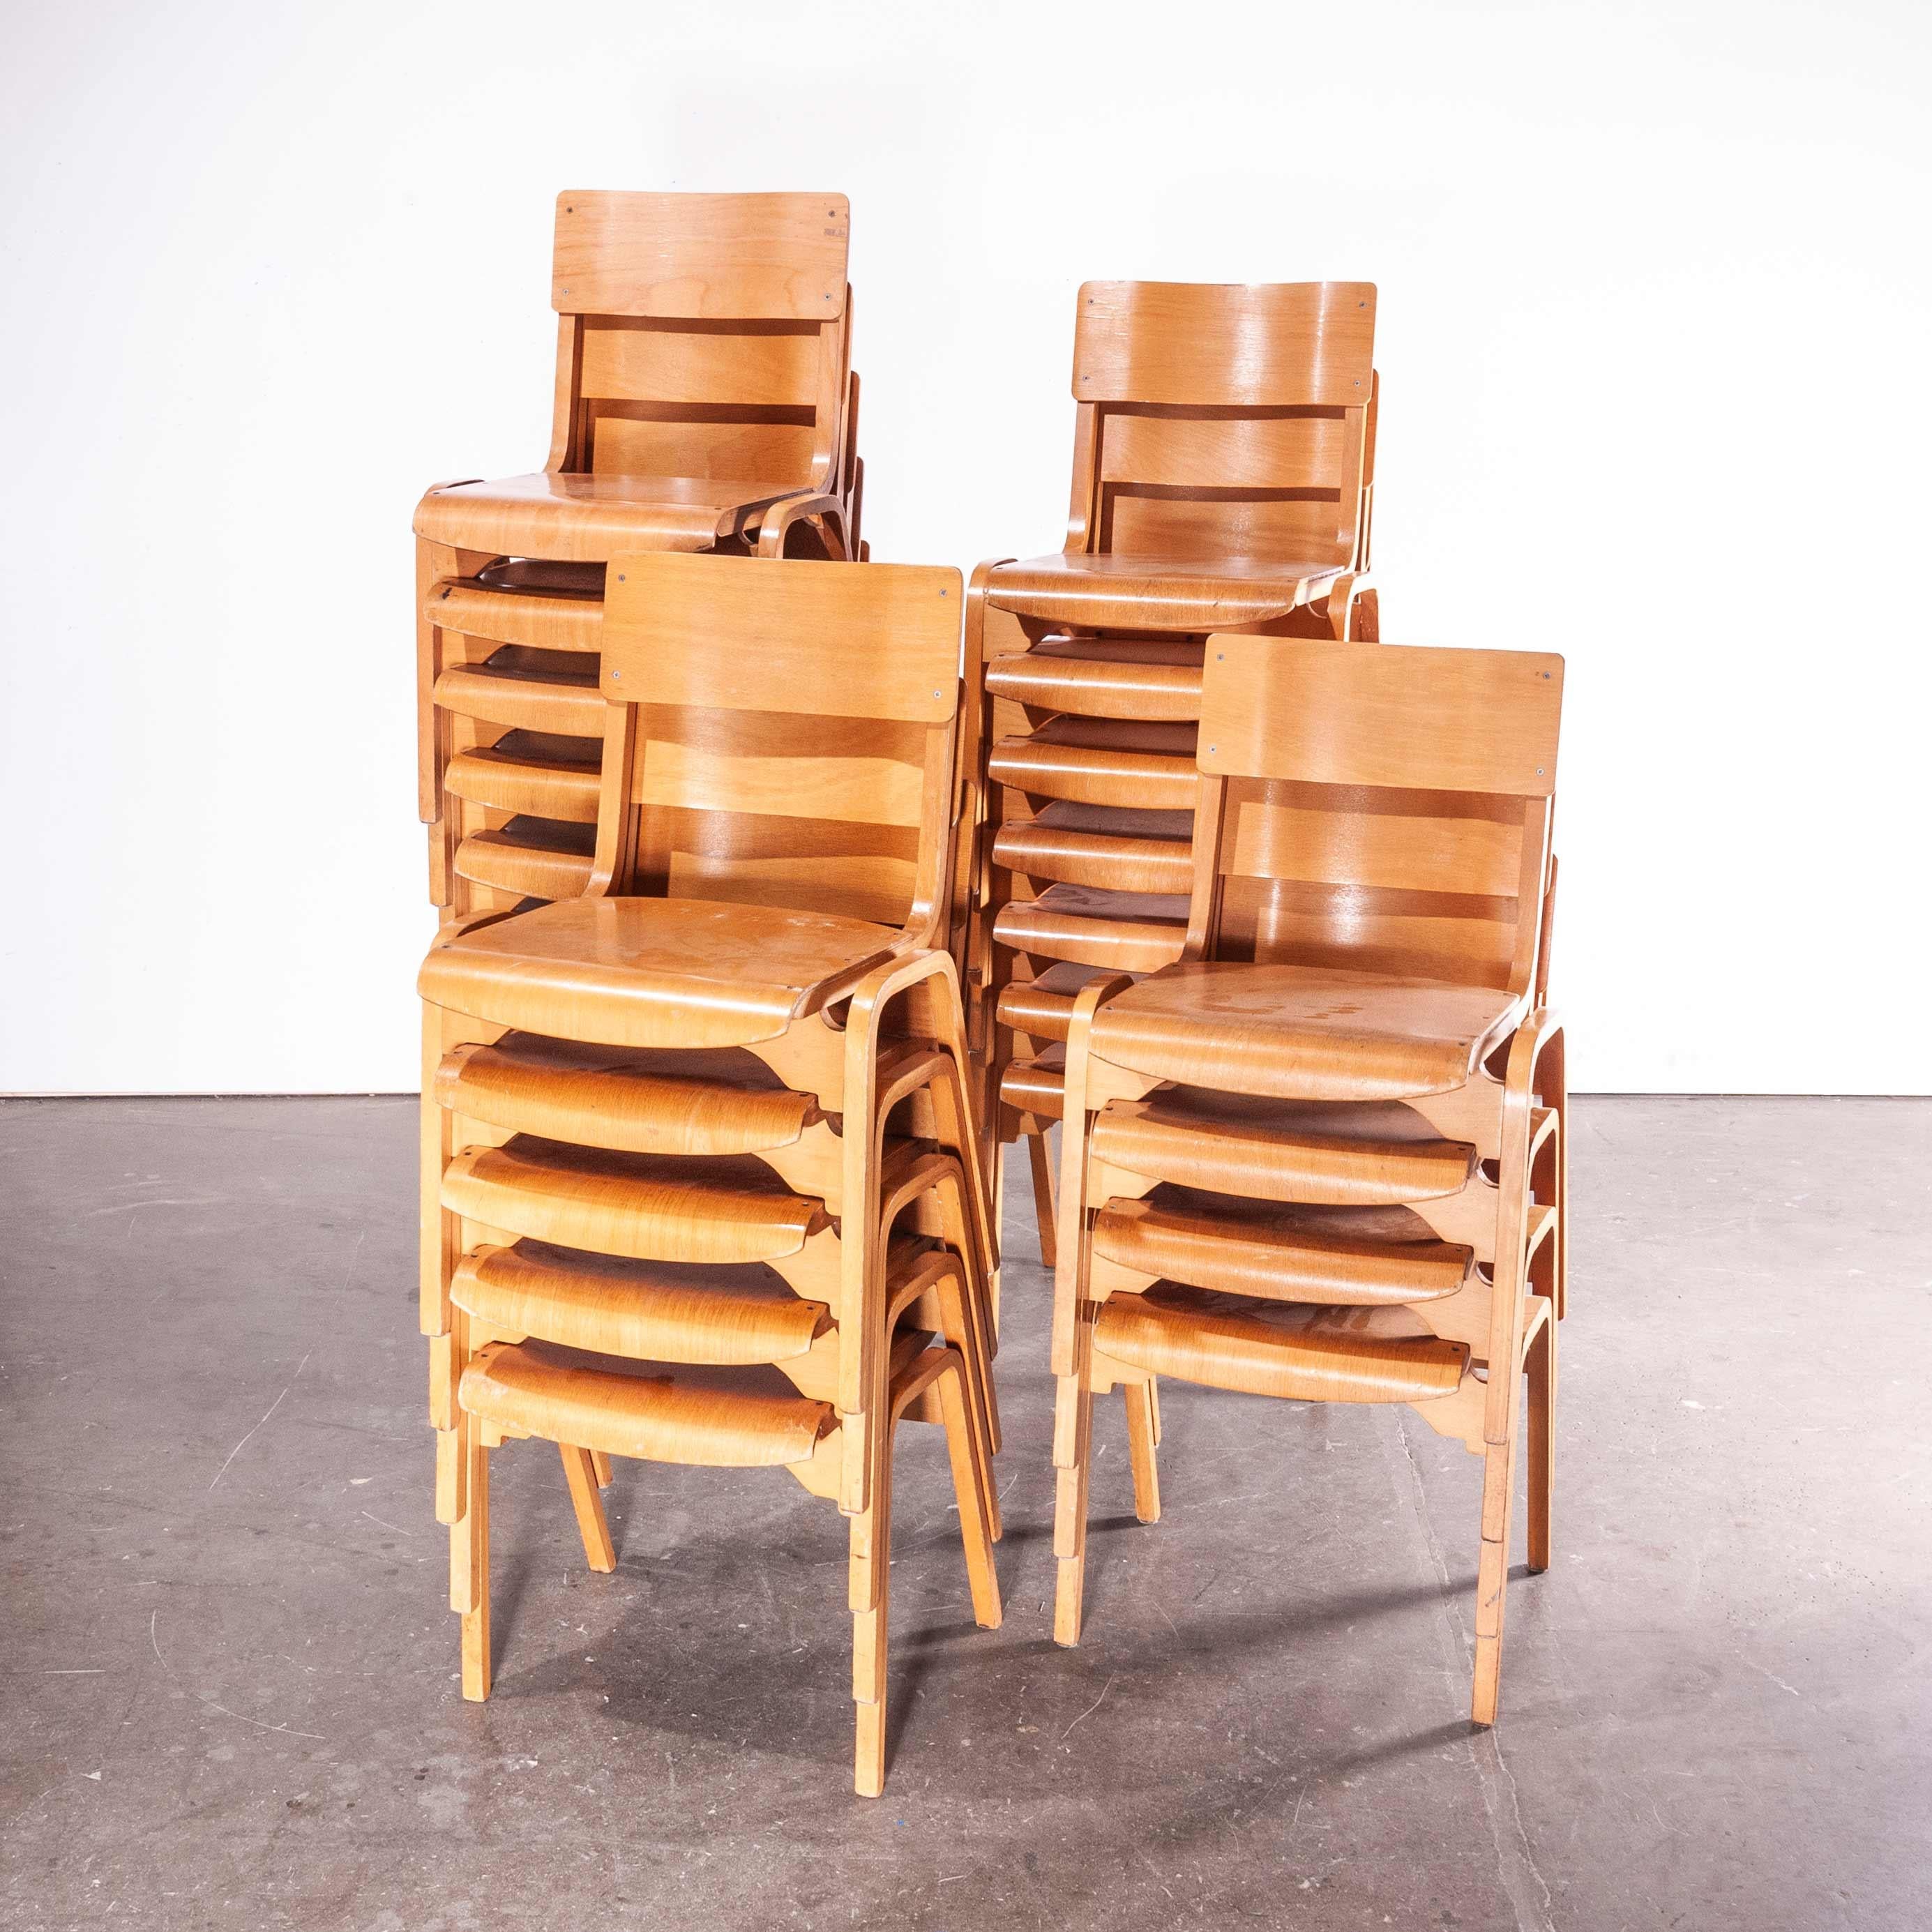 British 1950s Stacking Dining Chairs Made by Tecta Designed by Stafford